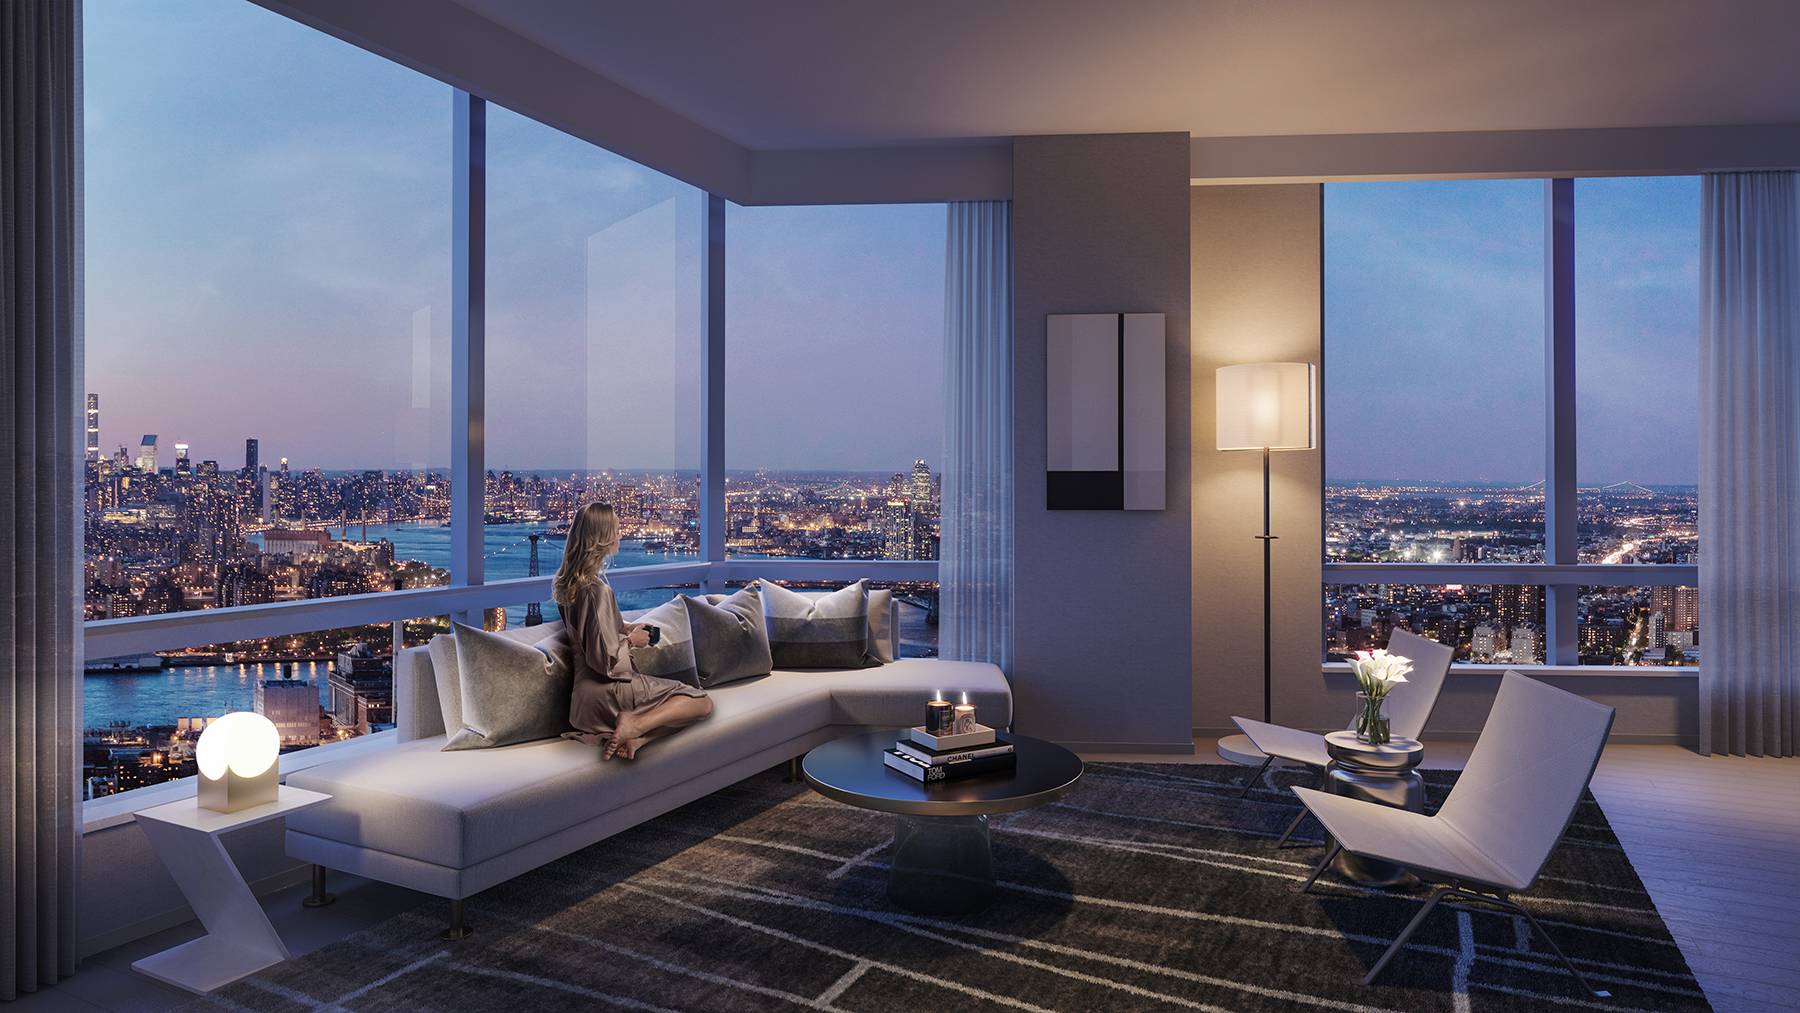 BROOKLYN POINT OFFERS ONE OF THE LAST 25 YEAR TAX ABATEMENTS AVAILABLE IN NEW YORK CITYExtell Development Company presents Brooklyn Point, a new standard of luxury living in Downtown Brooklyn.